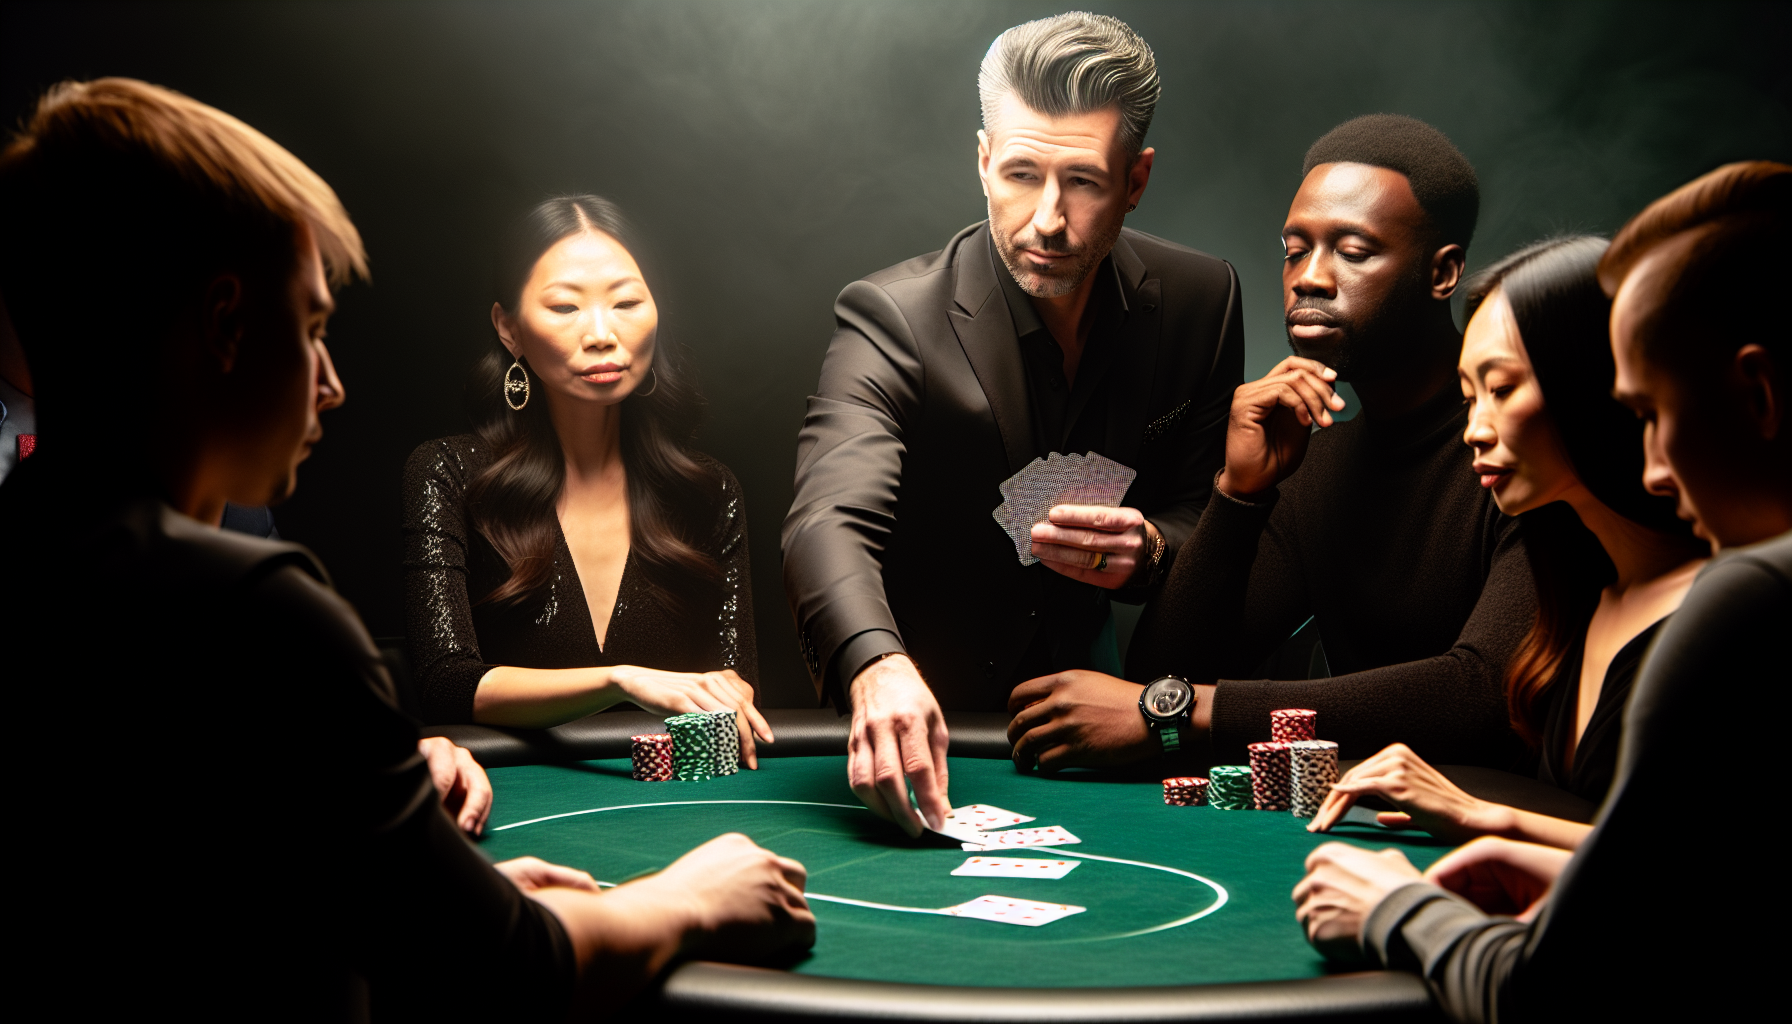 Immersive real-time gaming experiences in live dealer lounges